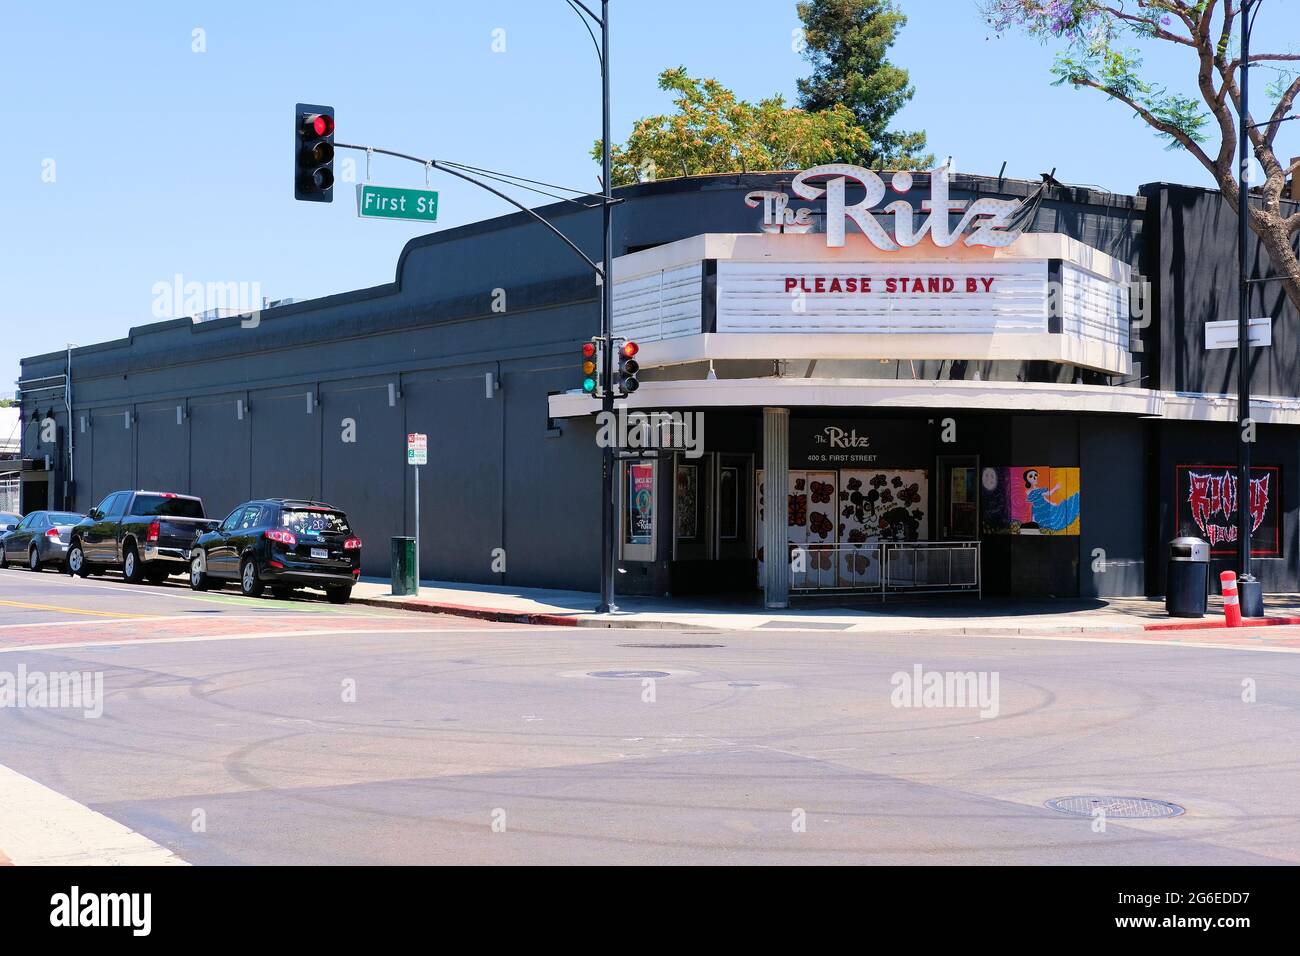 Exterior view and marquee of The Ritz, a San Jose, California live music venue temporarily closed due to the Covid-19 pandemic: Please Stand By. Stock Photo